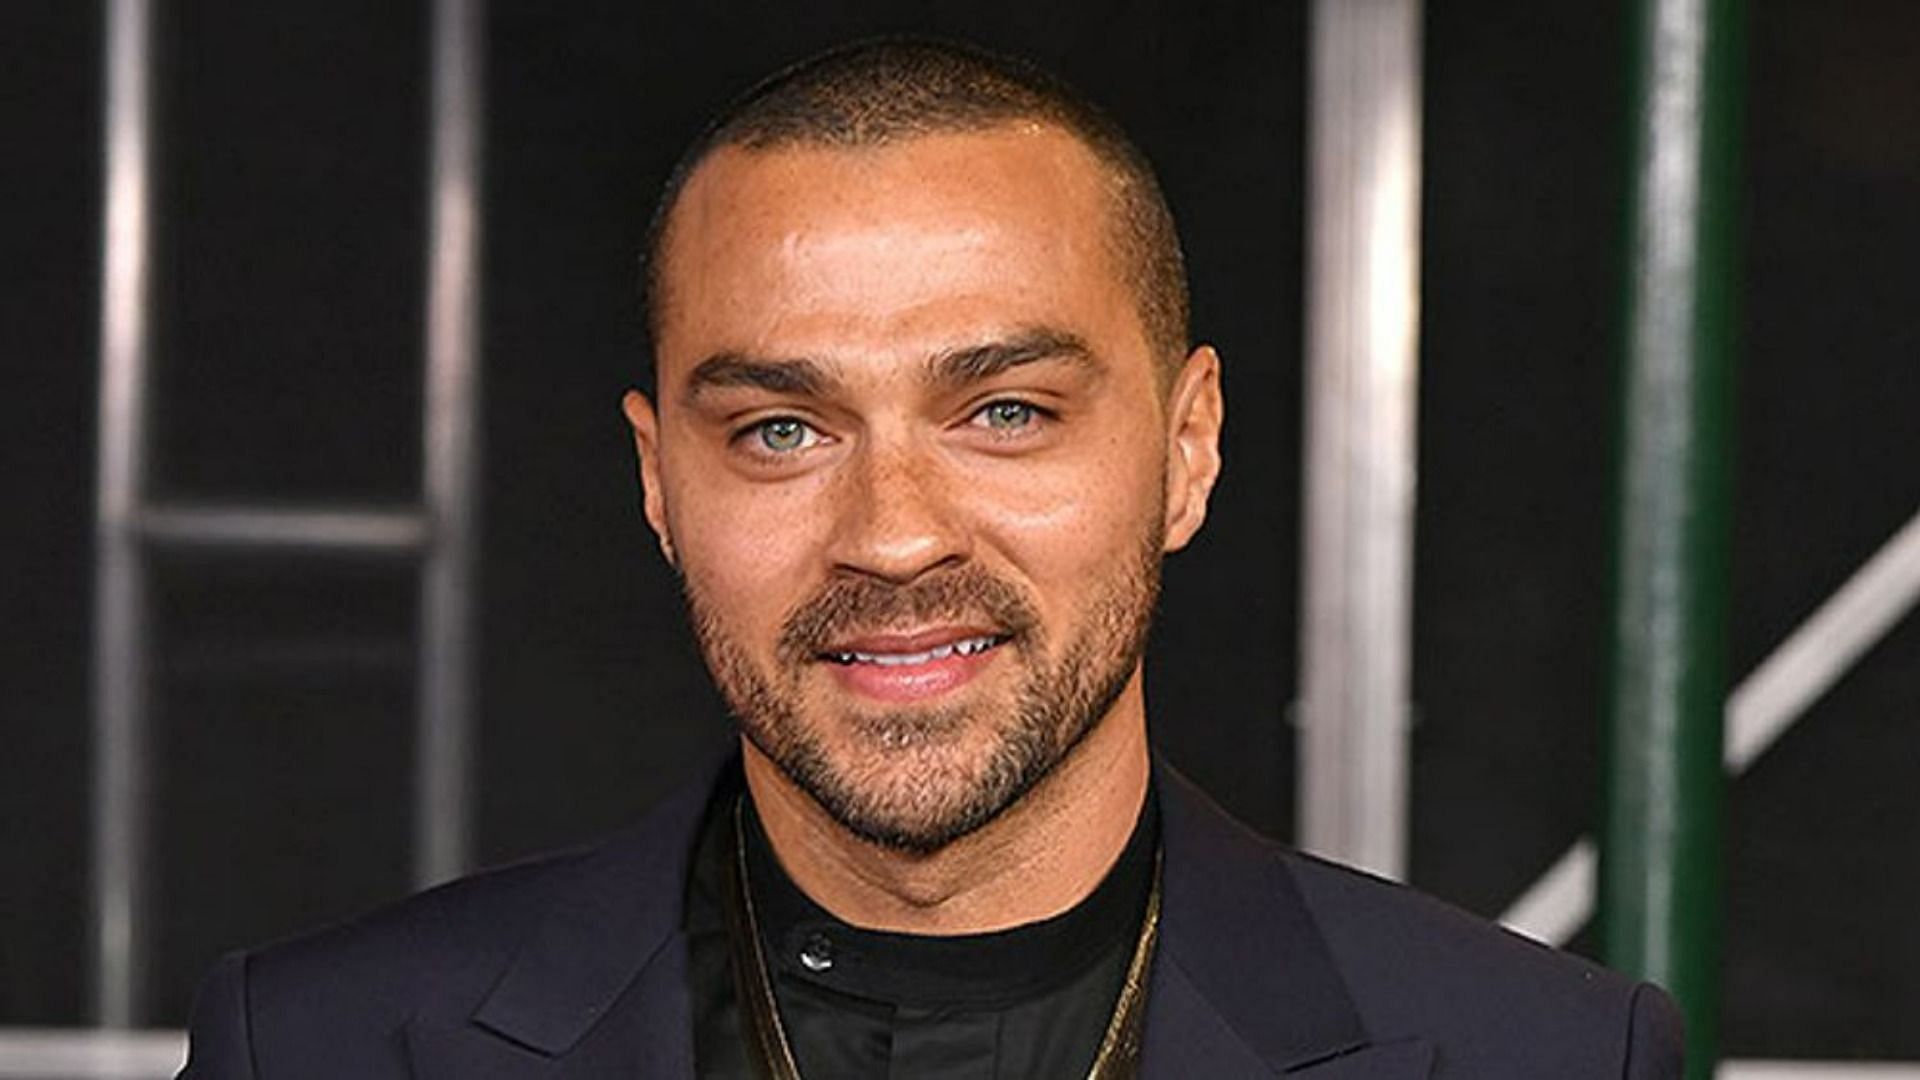 Video of Jesse Williams naked on stage goes viral on social media (Image via Shutterstock)